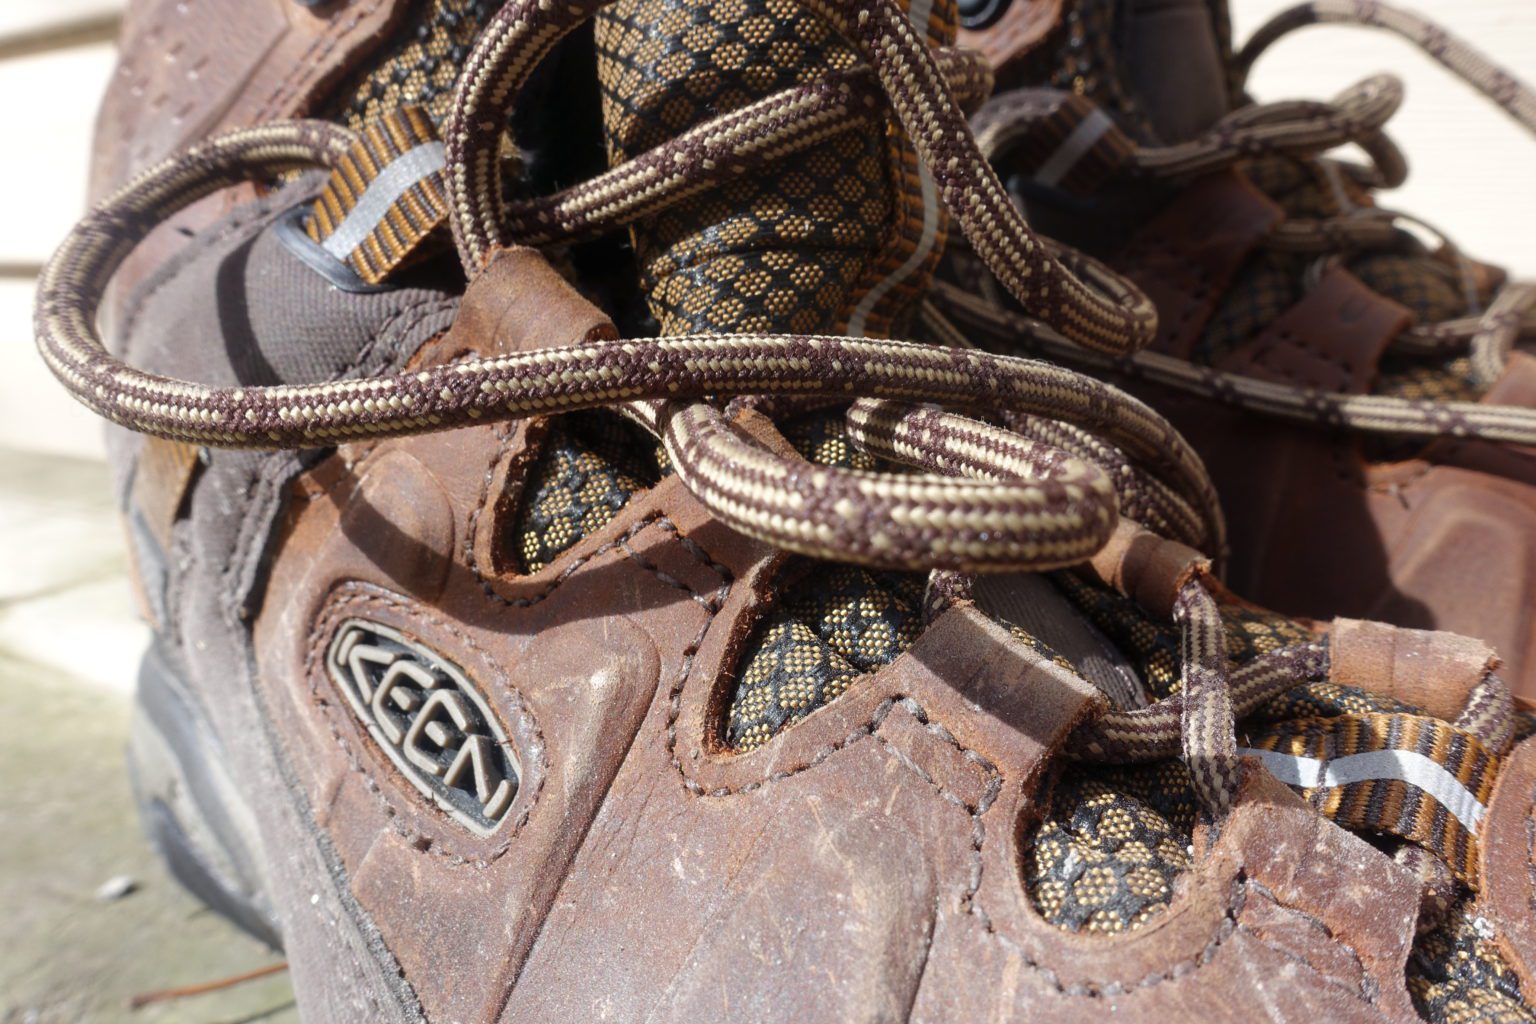 Review: Keen Targhee III Mid WP Hiking Boots - Gripped Magazine